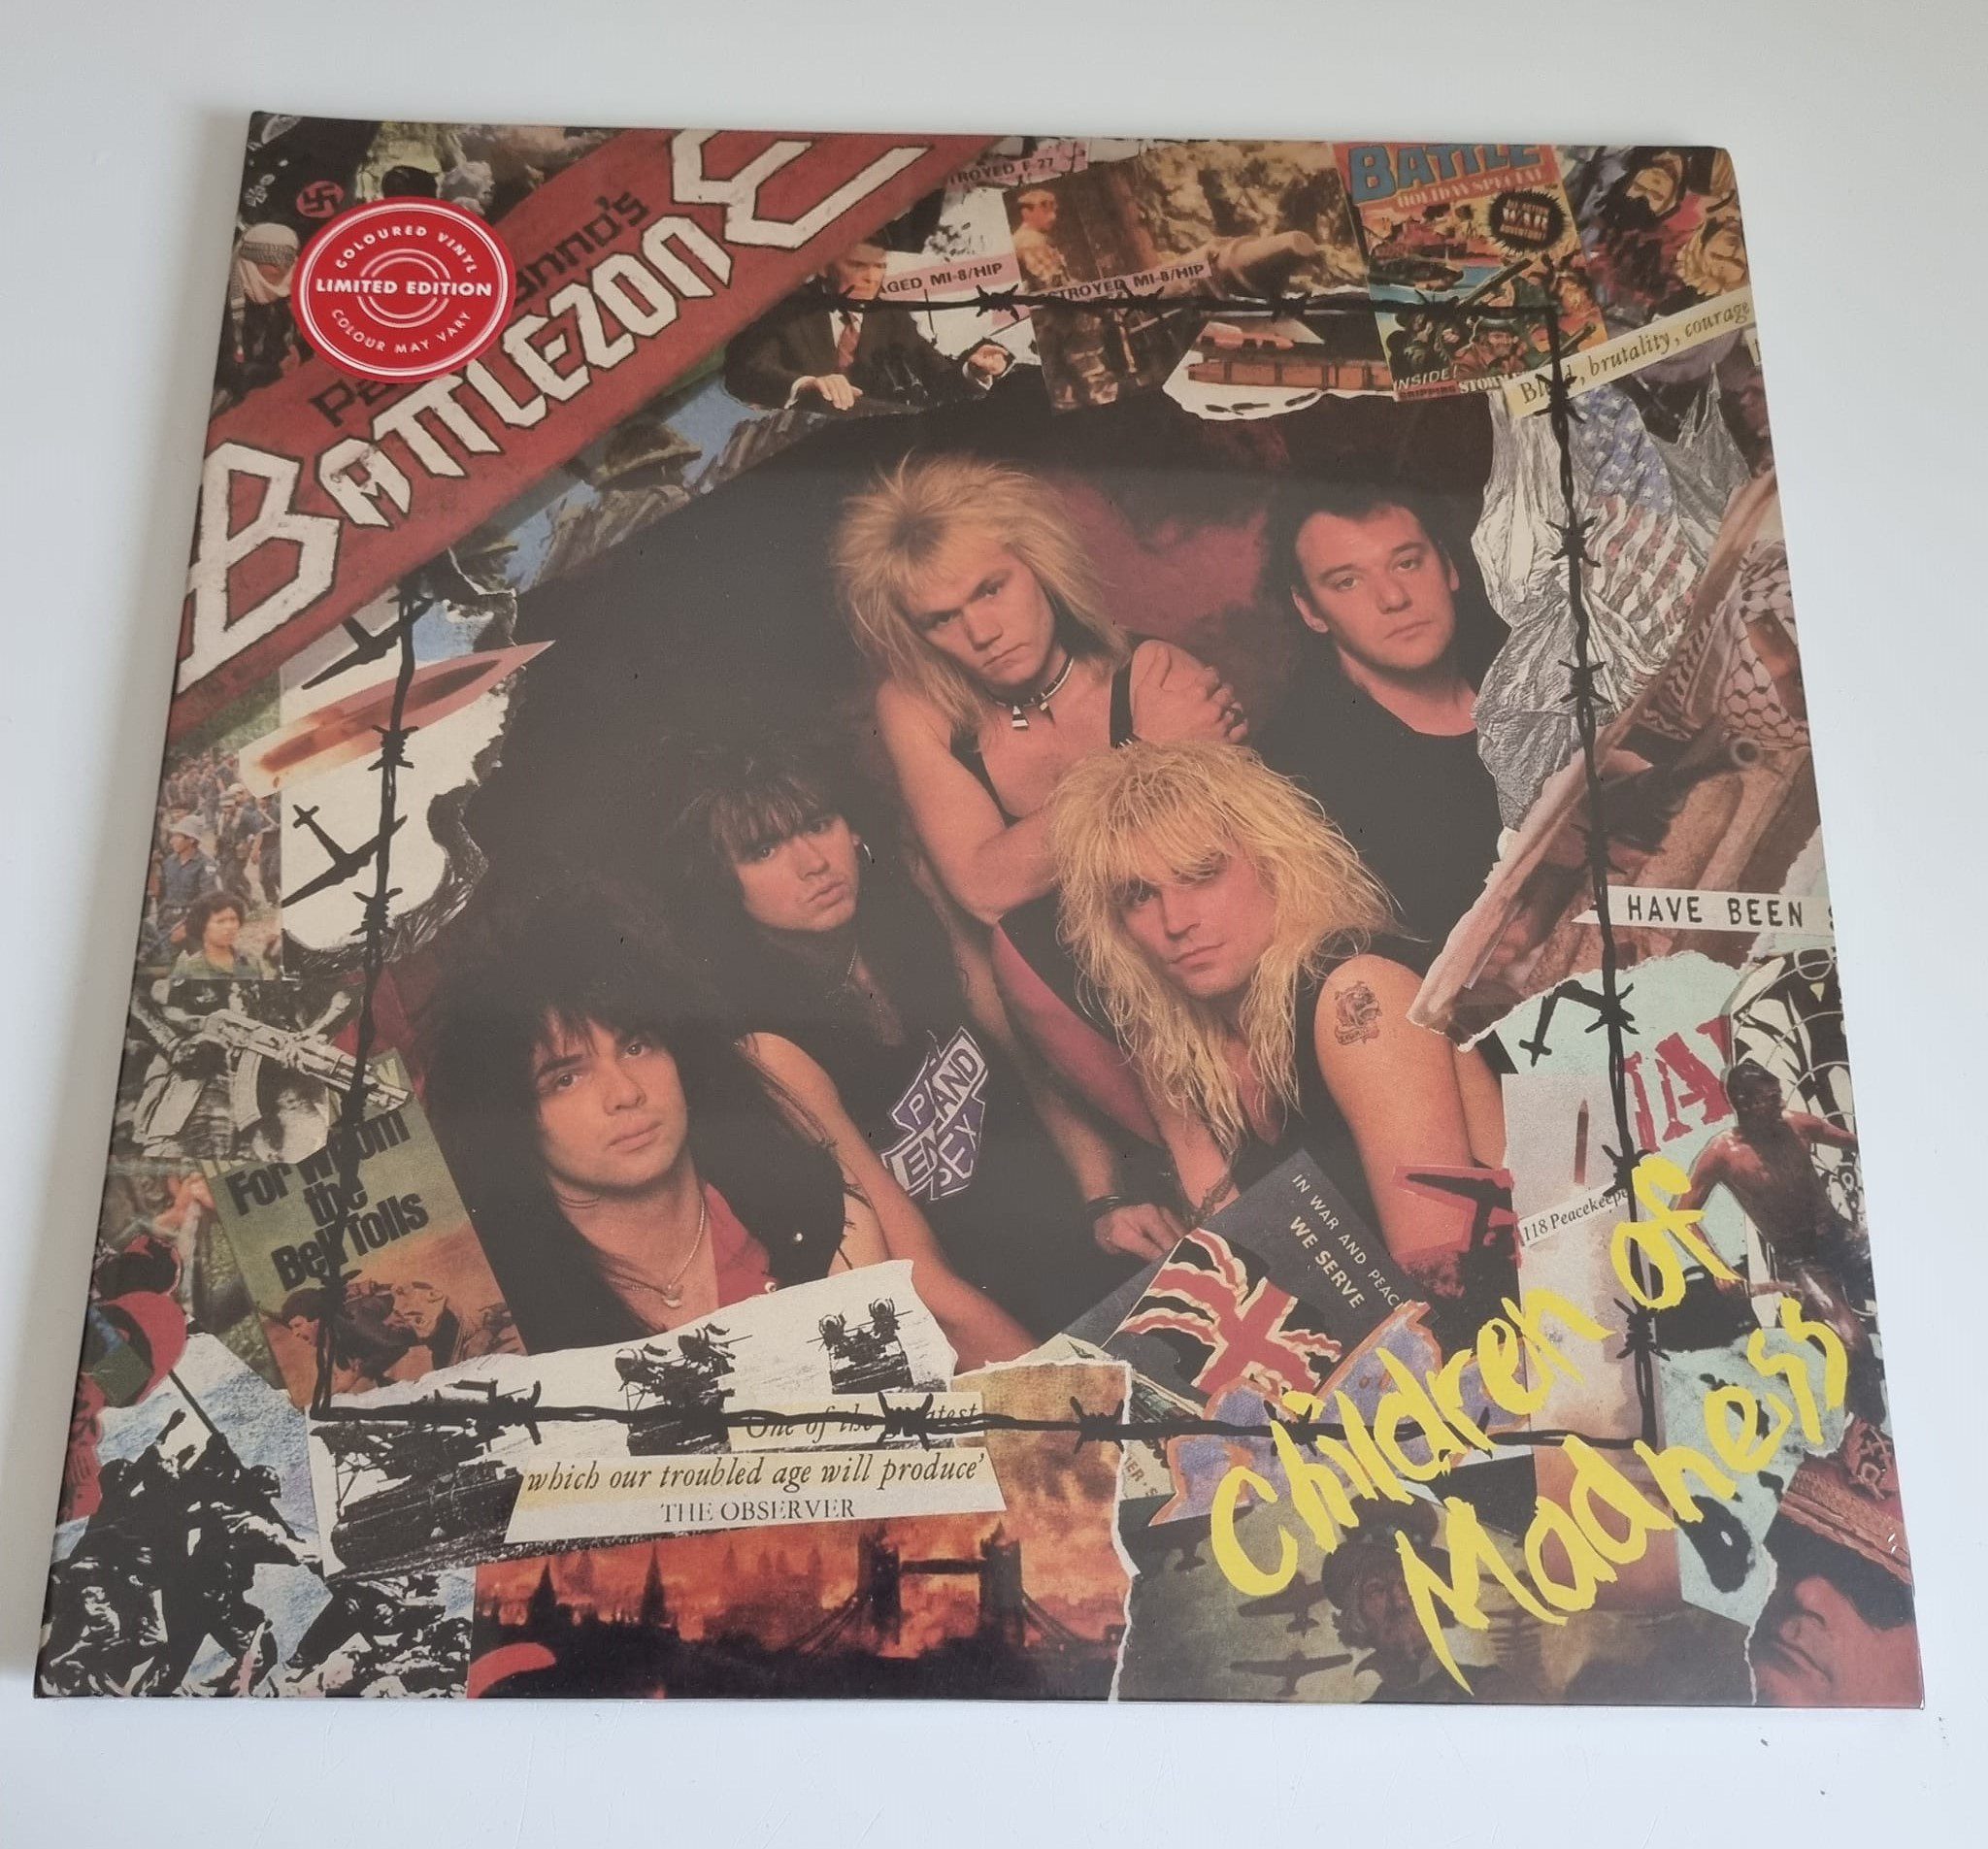 Buy this rare Paul Di Anno's record by clicking here